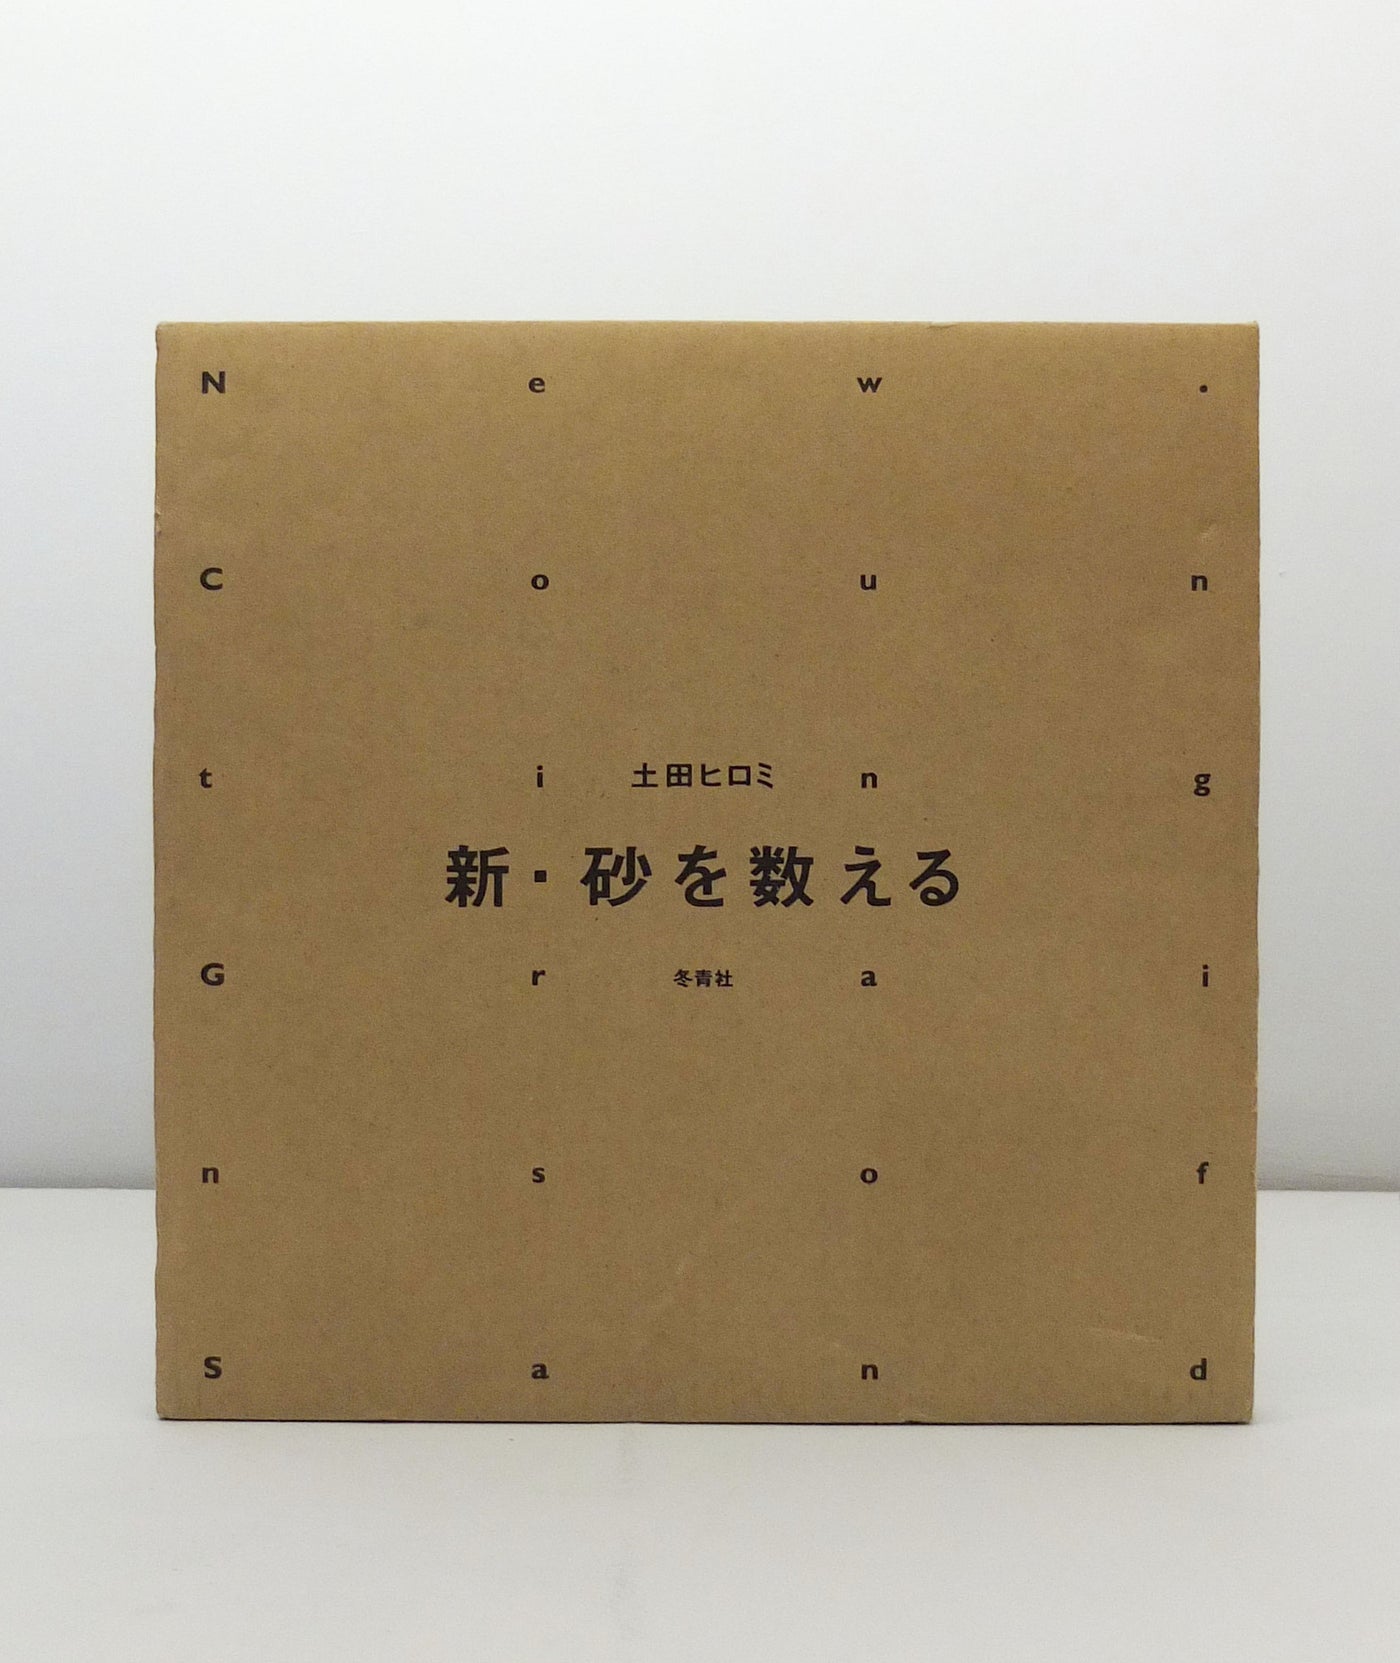 Counting Grains of Sand 1976-1989 by Hiromi Tsuchida}